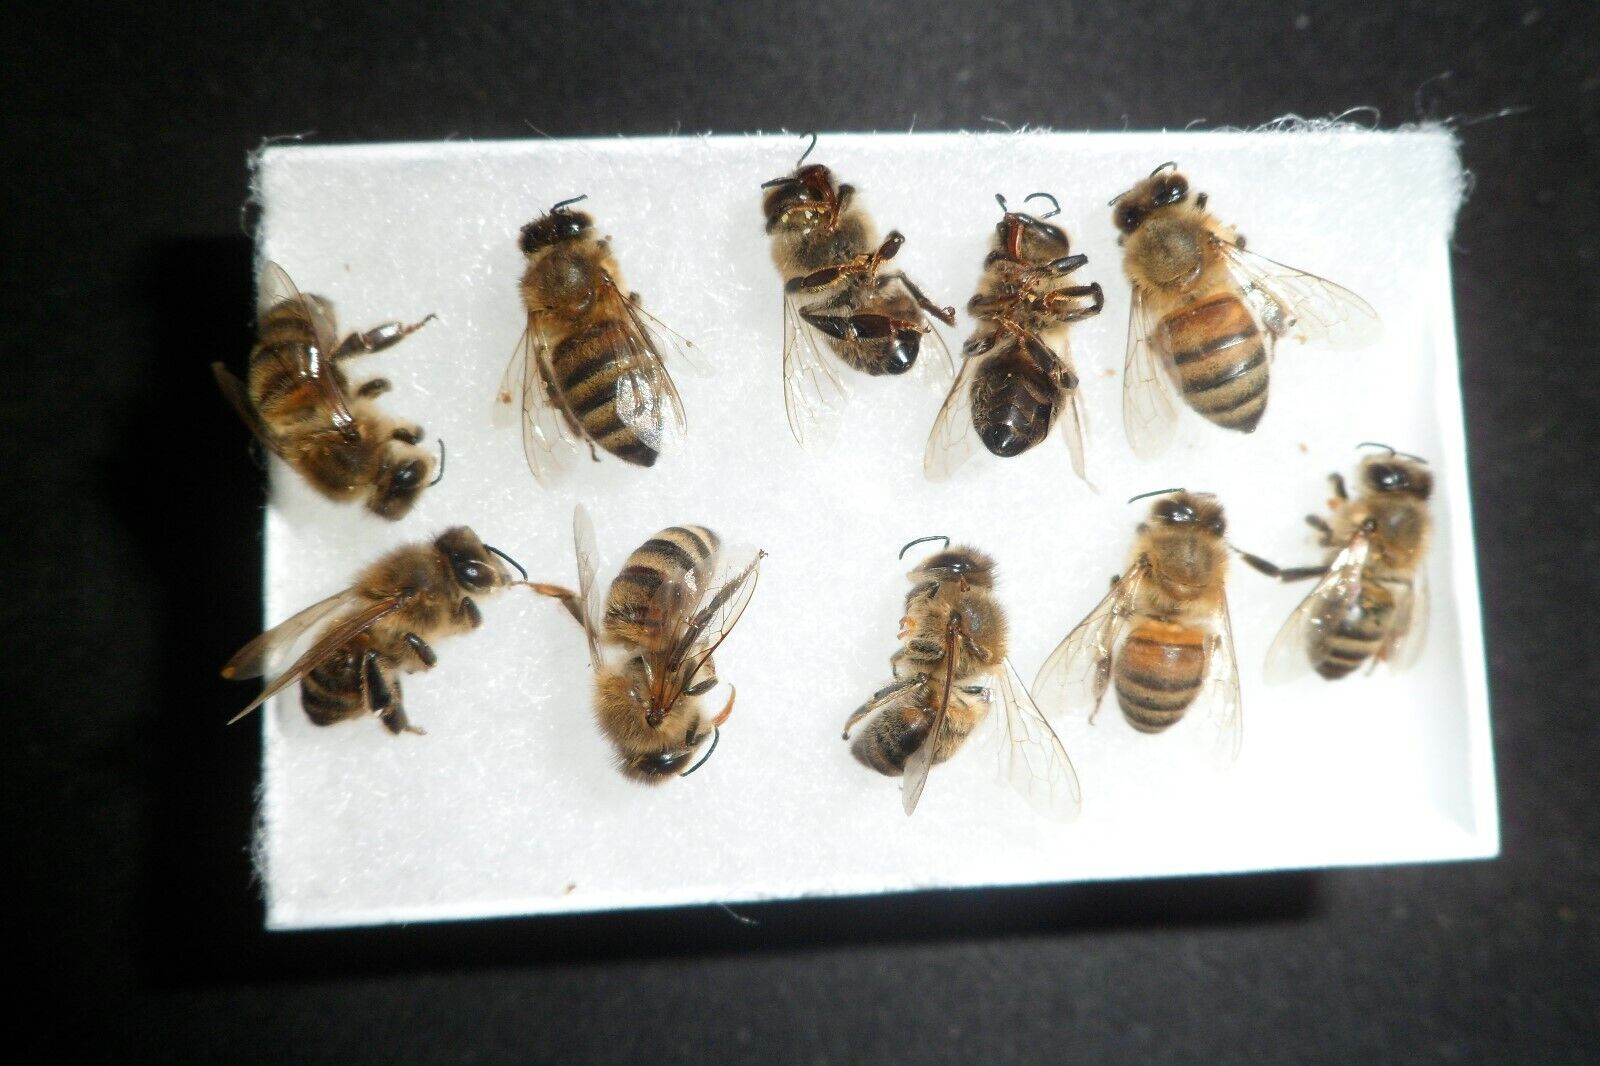 USA Bees FRESH 14 REAL Honeybee's DRYED SPECIMEN INSECT TAXIDERMY+Free Necklace